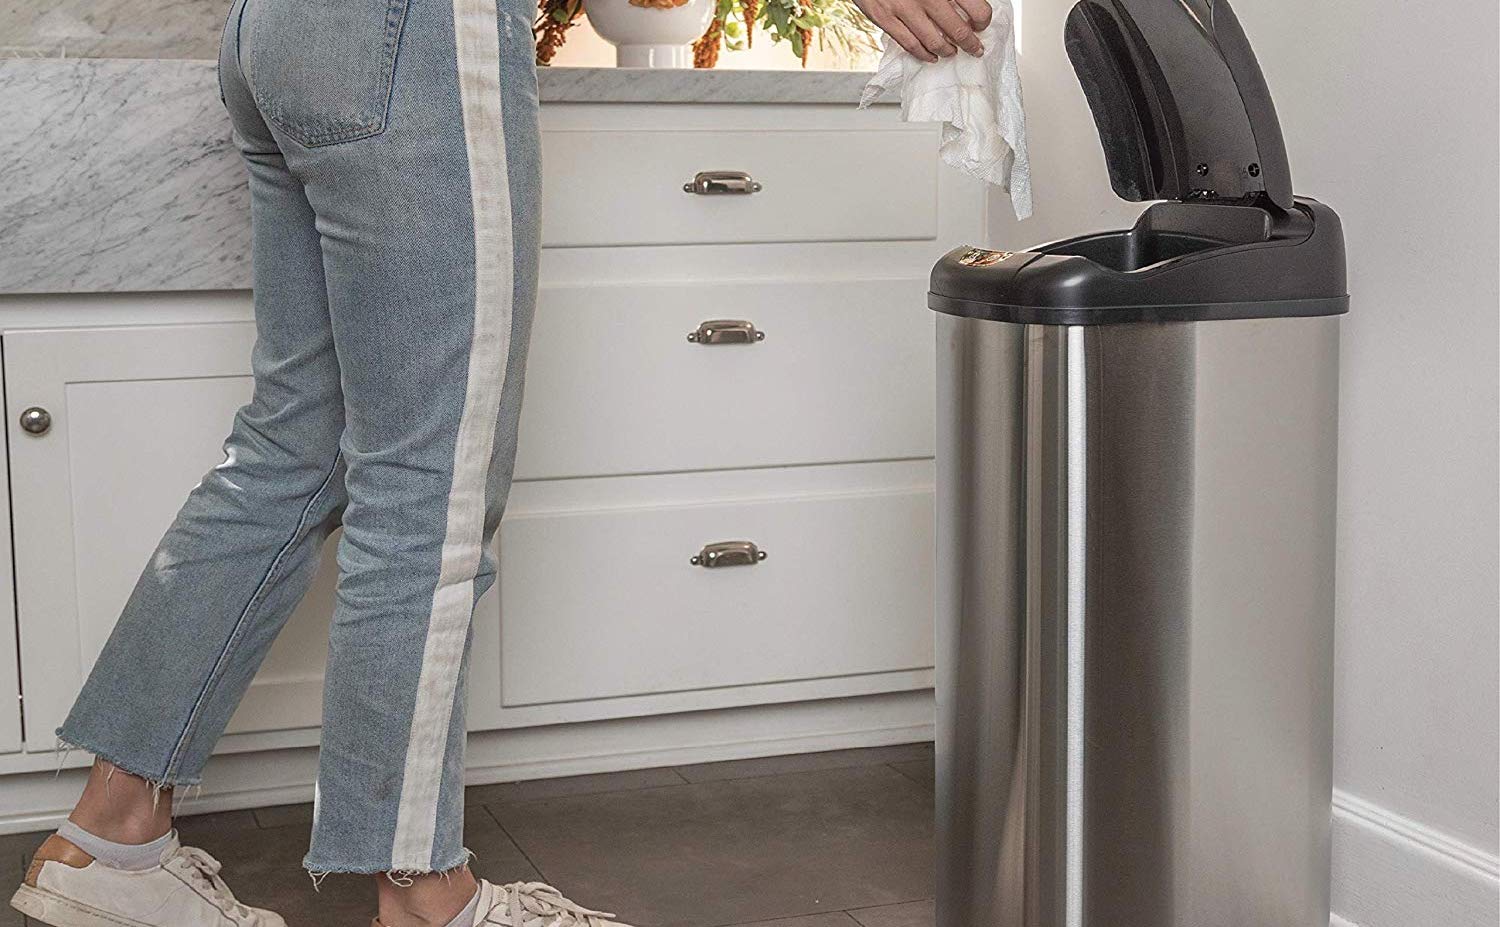 Top 10 Best Automatic Trash Cans in 2023 Reviews Buyer’s Guide